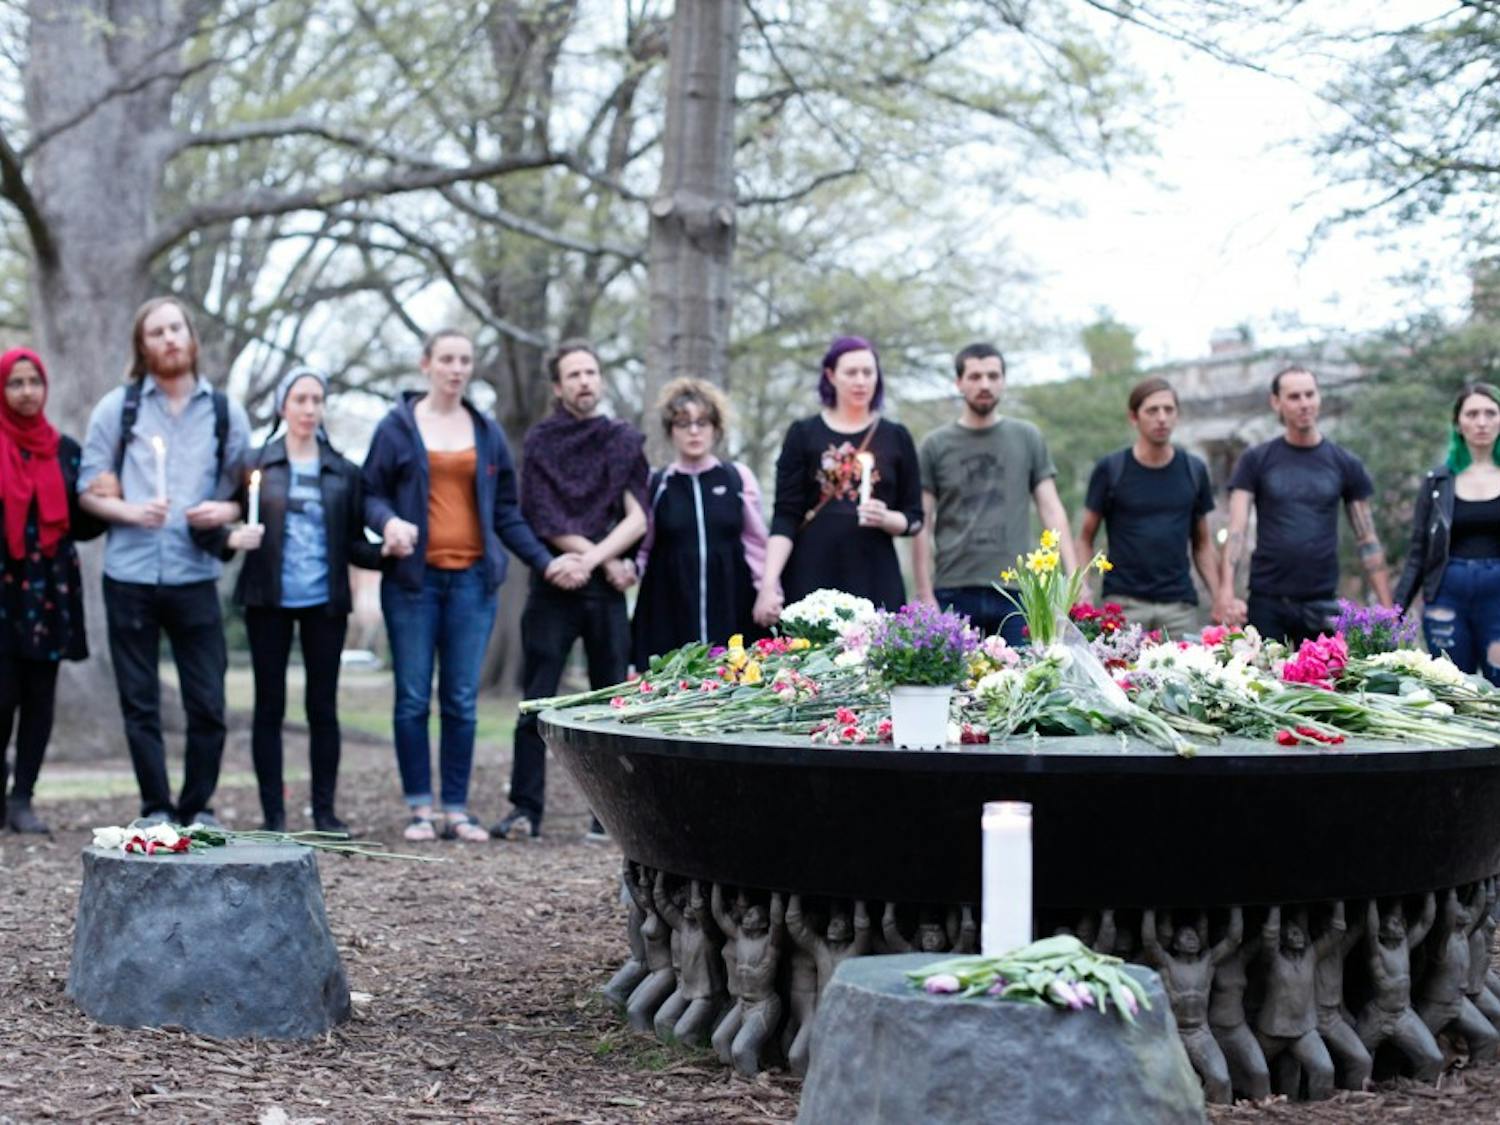 Students and community members hold hands during the Unsung Founders Memorial vigil hosted by UNC Black Congress, Thursday April 4, 2019 at McCorkle Place.